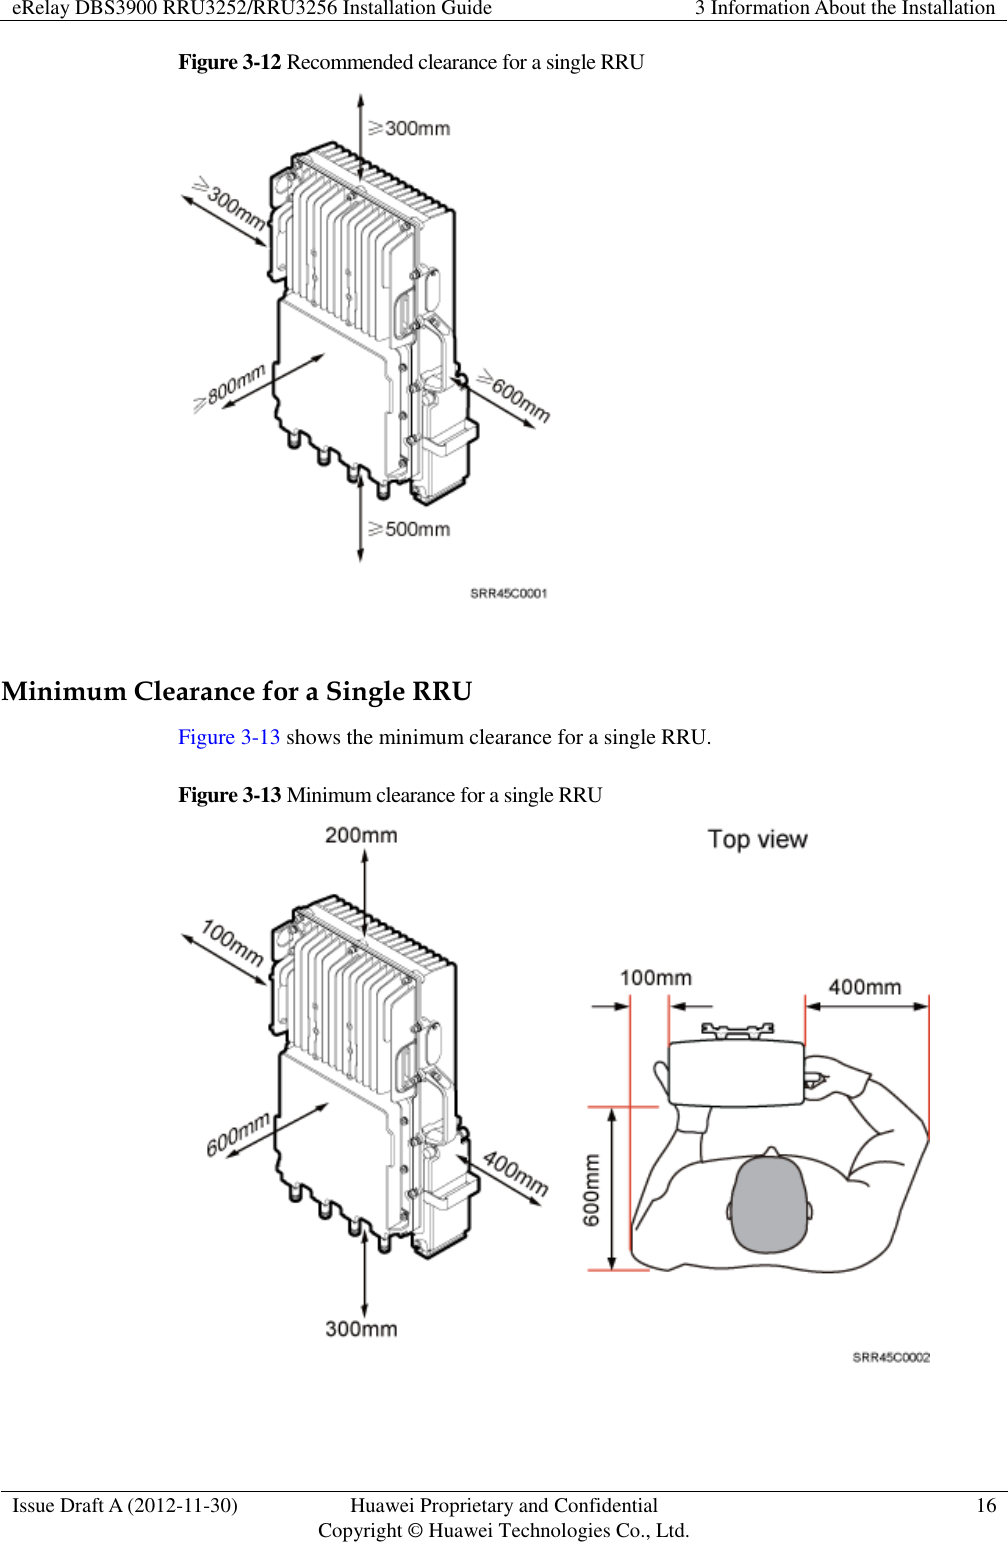 eRelay DBS3900 RRU3252/RRU3256 Installation Guide 3 Information About the Installation  Issue Draft A (2012-11-30) Huawei Proprietary and Confidential                                     Copyright © Huawei Technologies Co., Ltd. 16  Figure 3-12 Recommended clearance for a single RRU   Minimum Clearance for a Single RRU Figure 3-13 shows the minimum clearance for a single RRU. Figure 3-13 Minimum clearance for a single RRU   